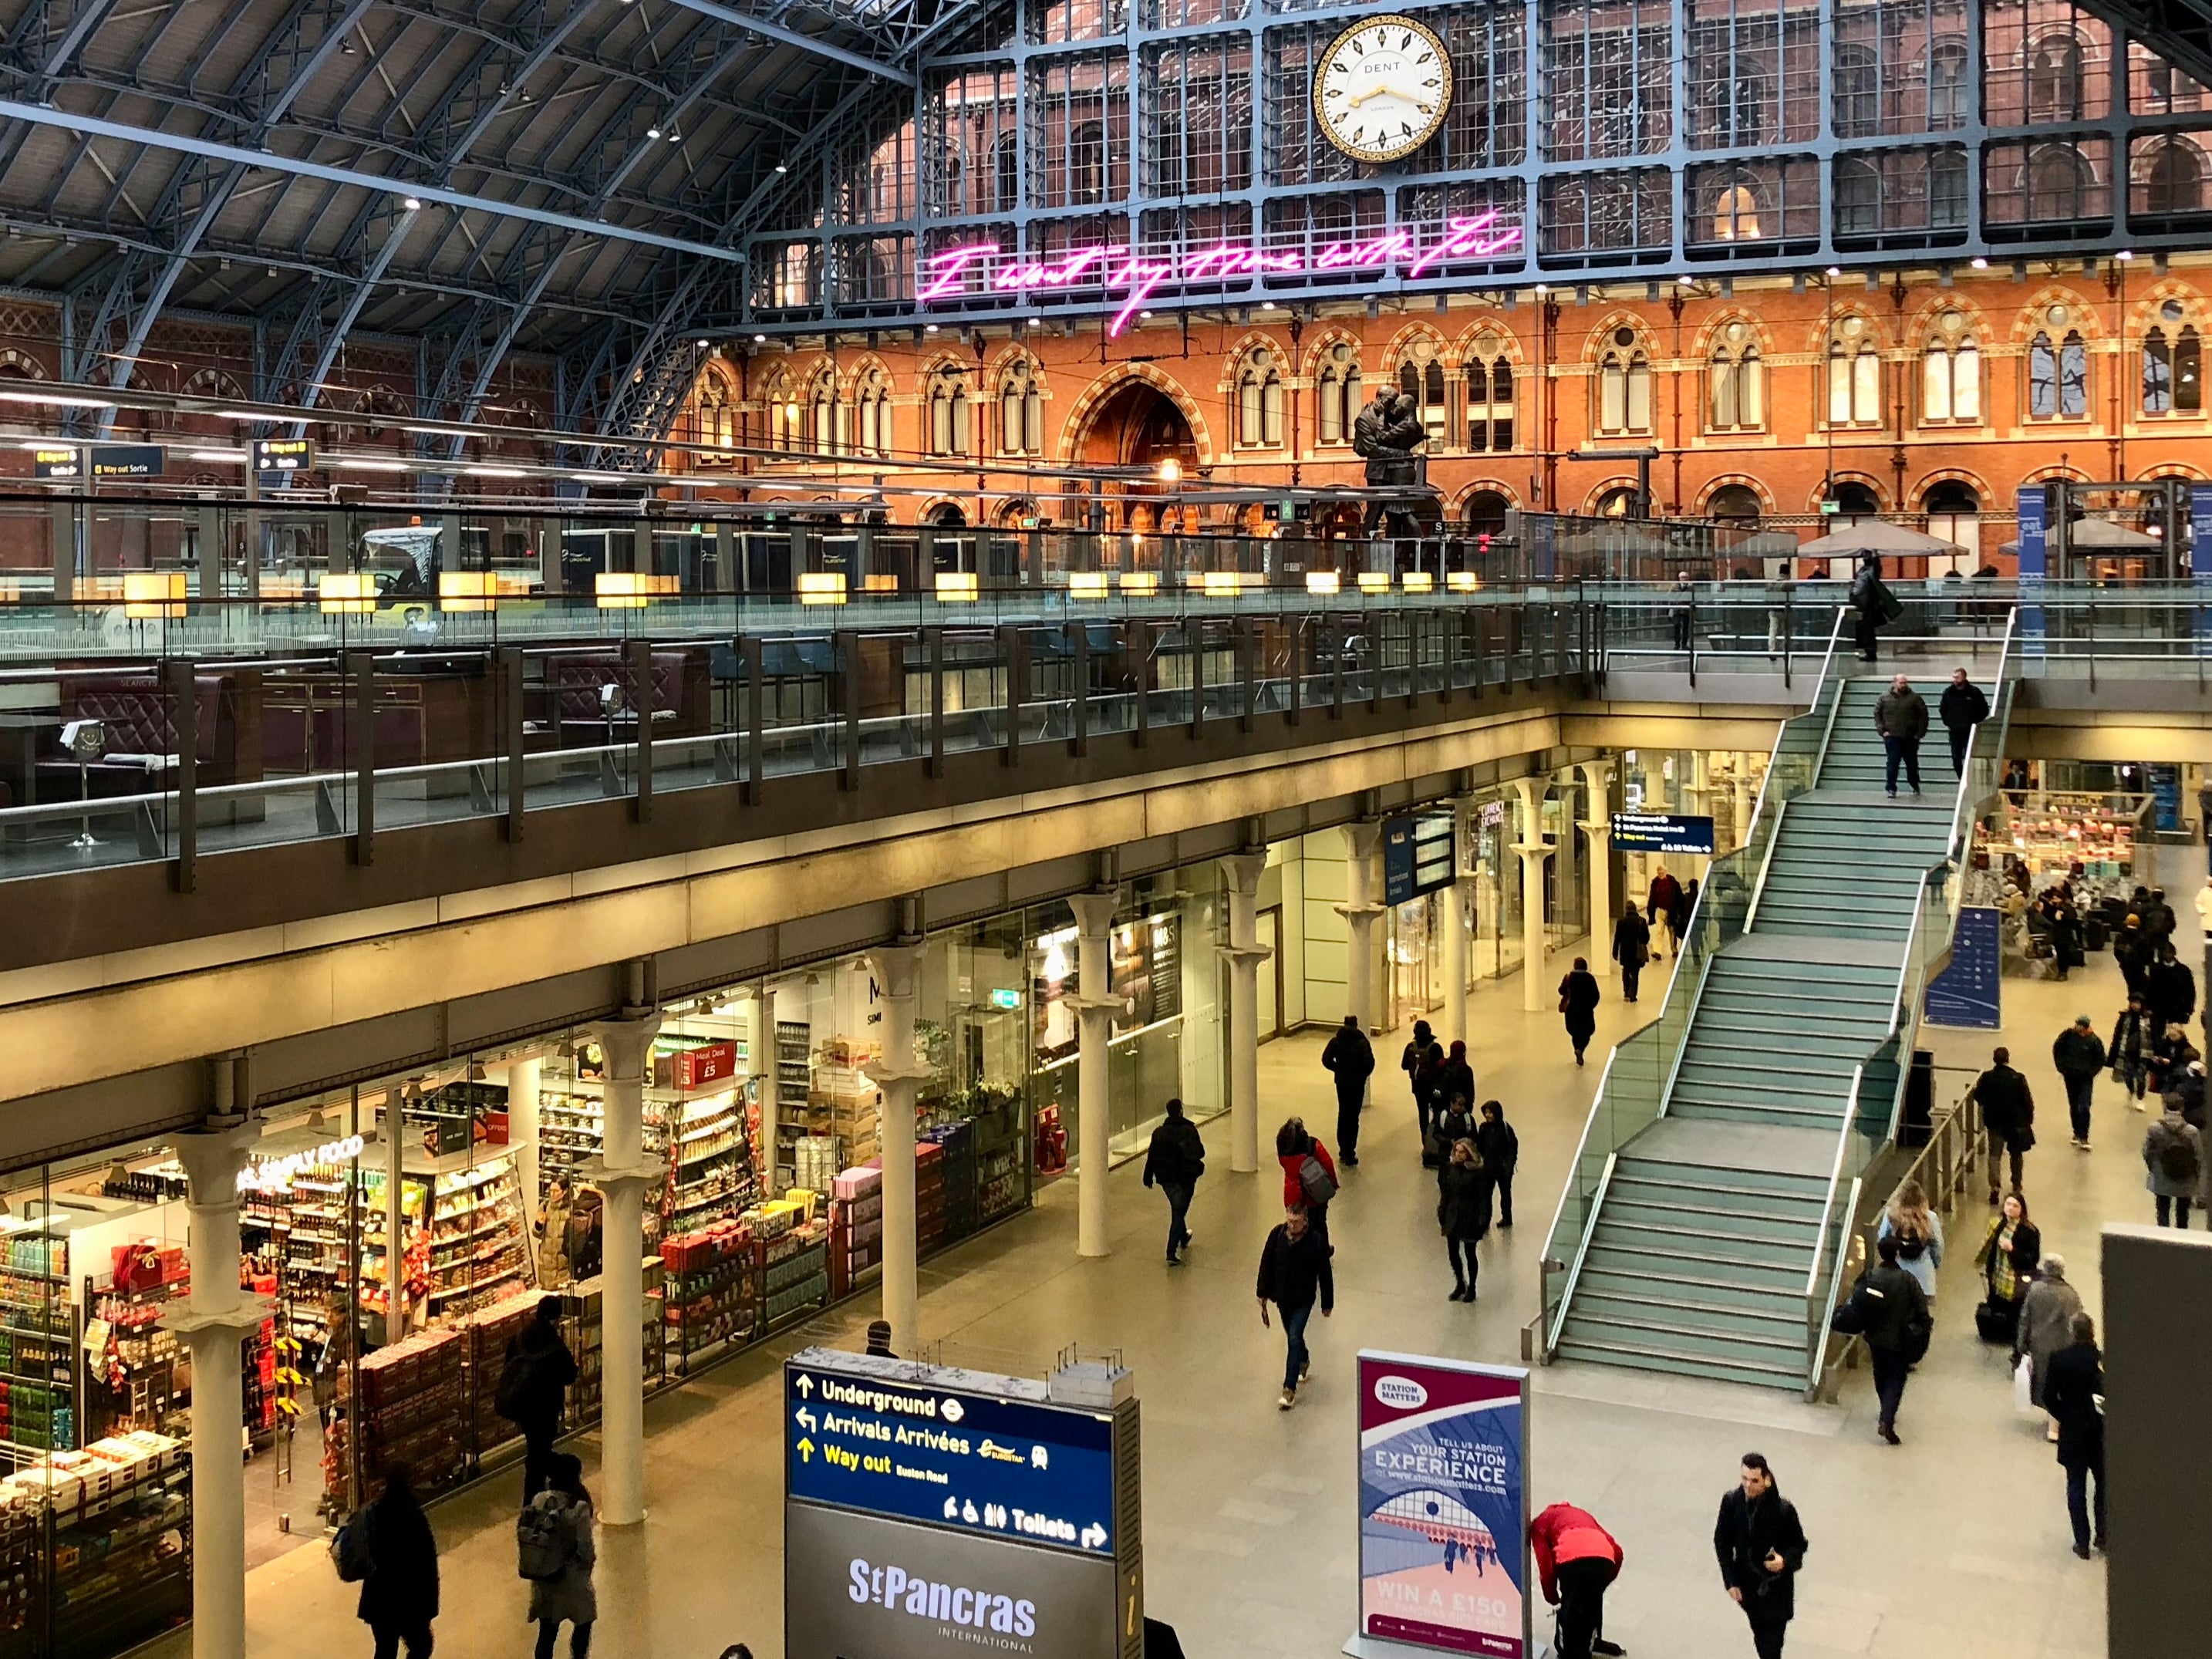 Room for more? London St Pancras International, the UK hub for Eurostar trains to Paris, Brussels and Amsterdam